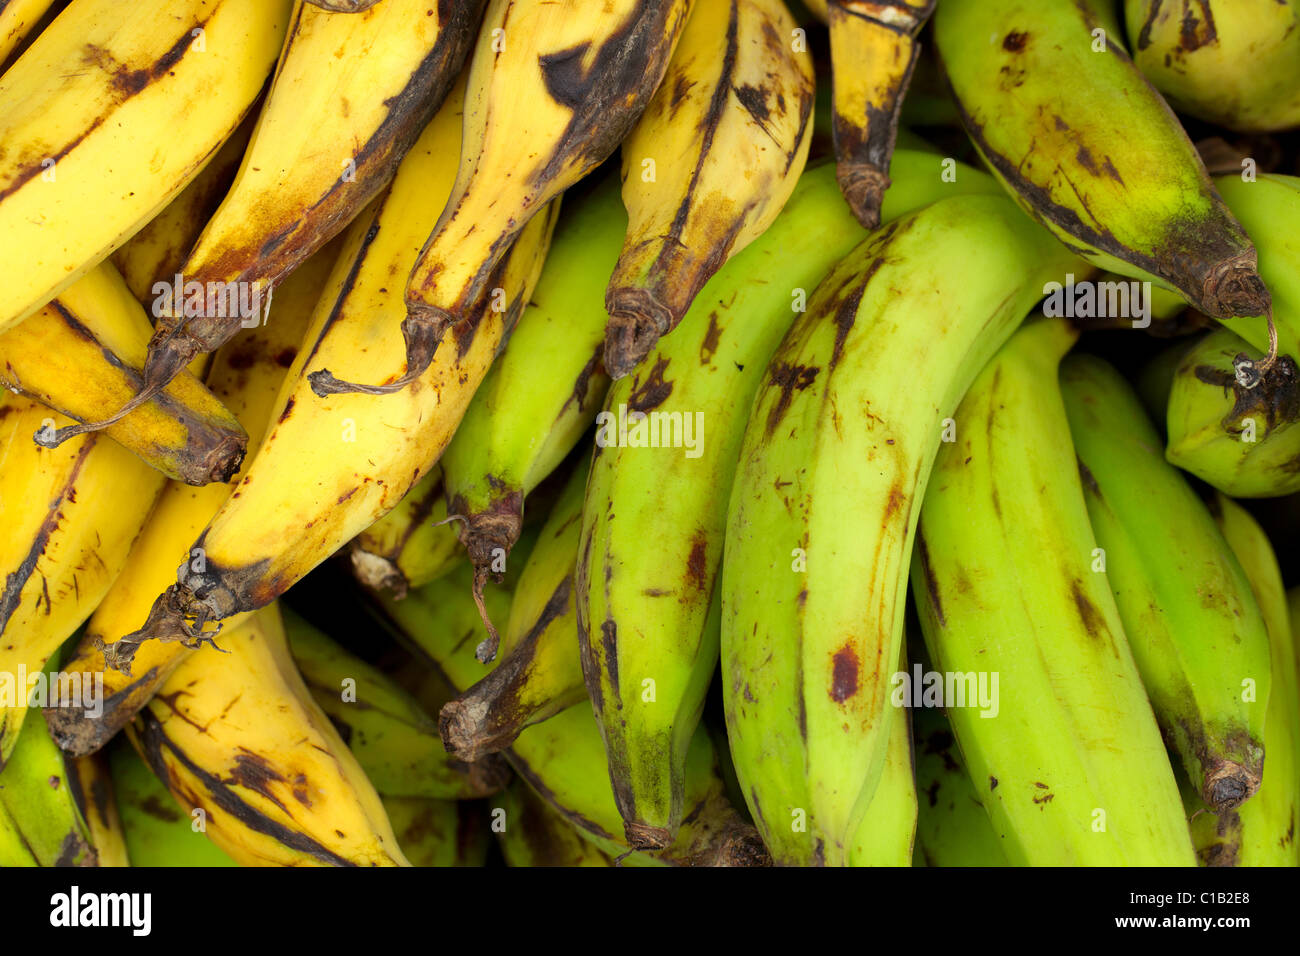 Different Types Of Bananas Displayed In The Market Stock Photo